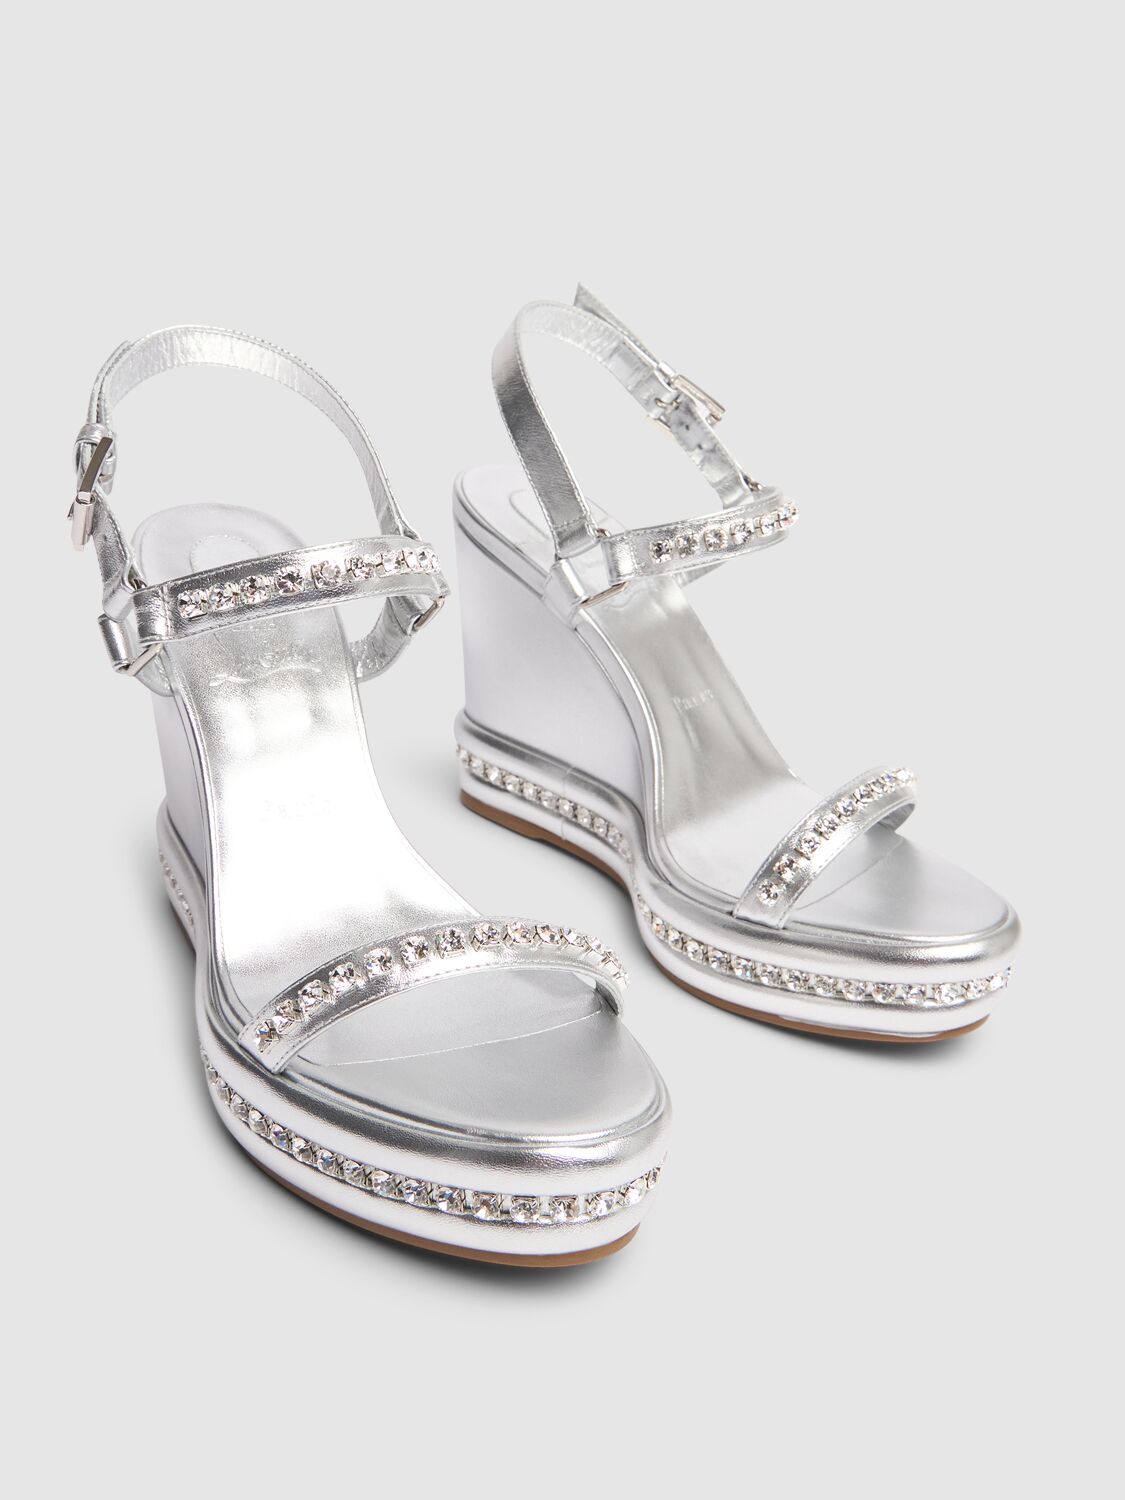 Shop Christian Louboutin 110mm Pyrastrass Leather Wedges In Silver